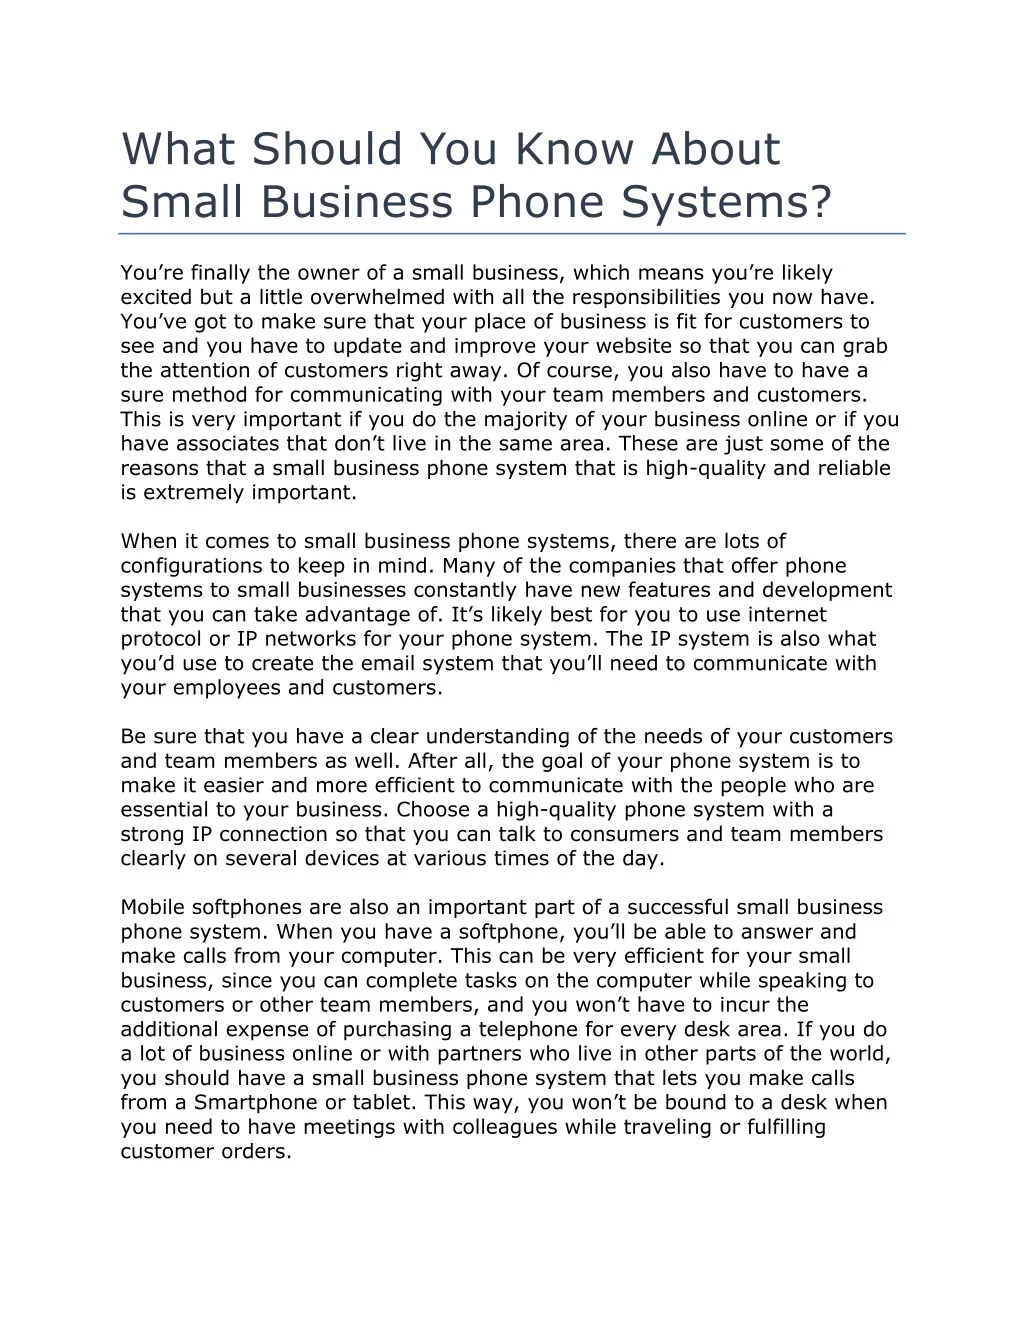 what should you know about small business phone